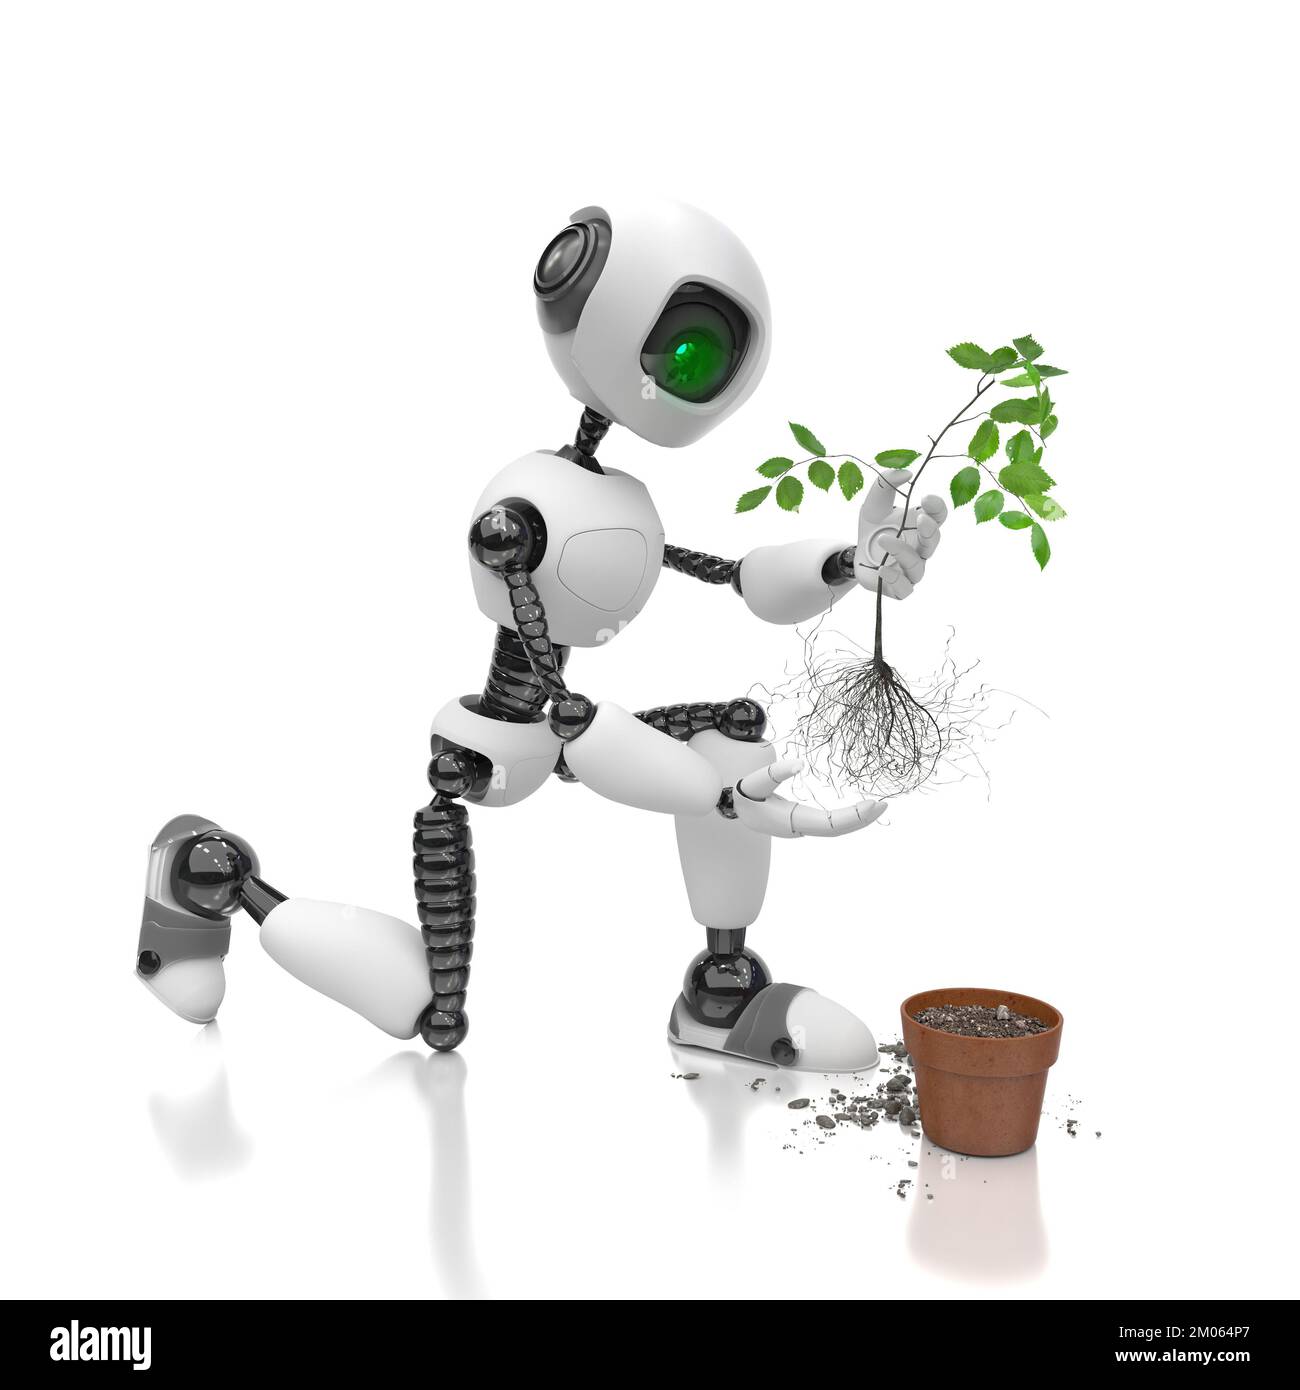 Robot Humanoid plants a seedling in a flowerpot on a white background. Future concept with smart robotics and artificial intelligence. 3D concept rend Stock Photo